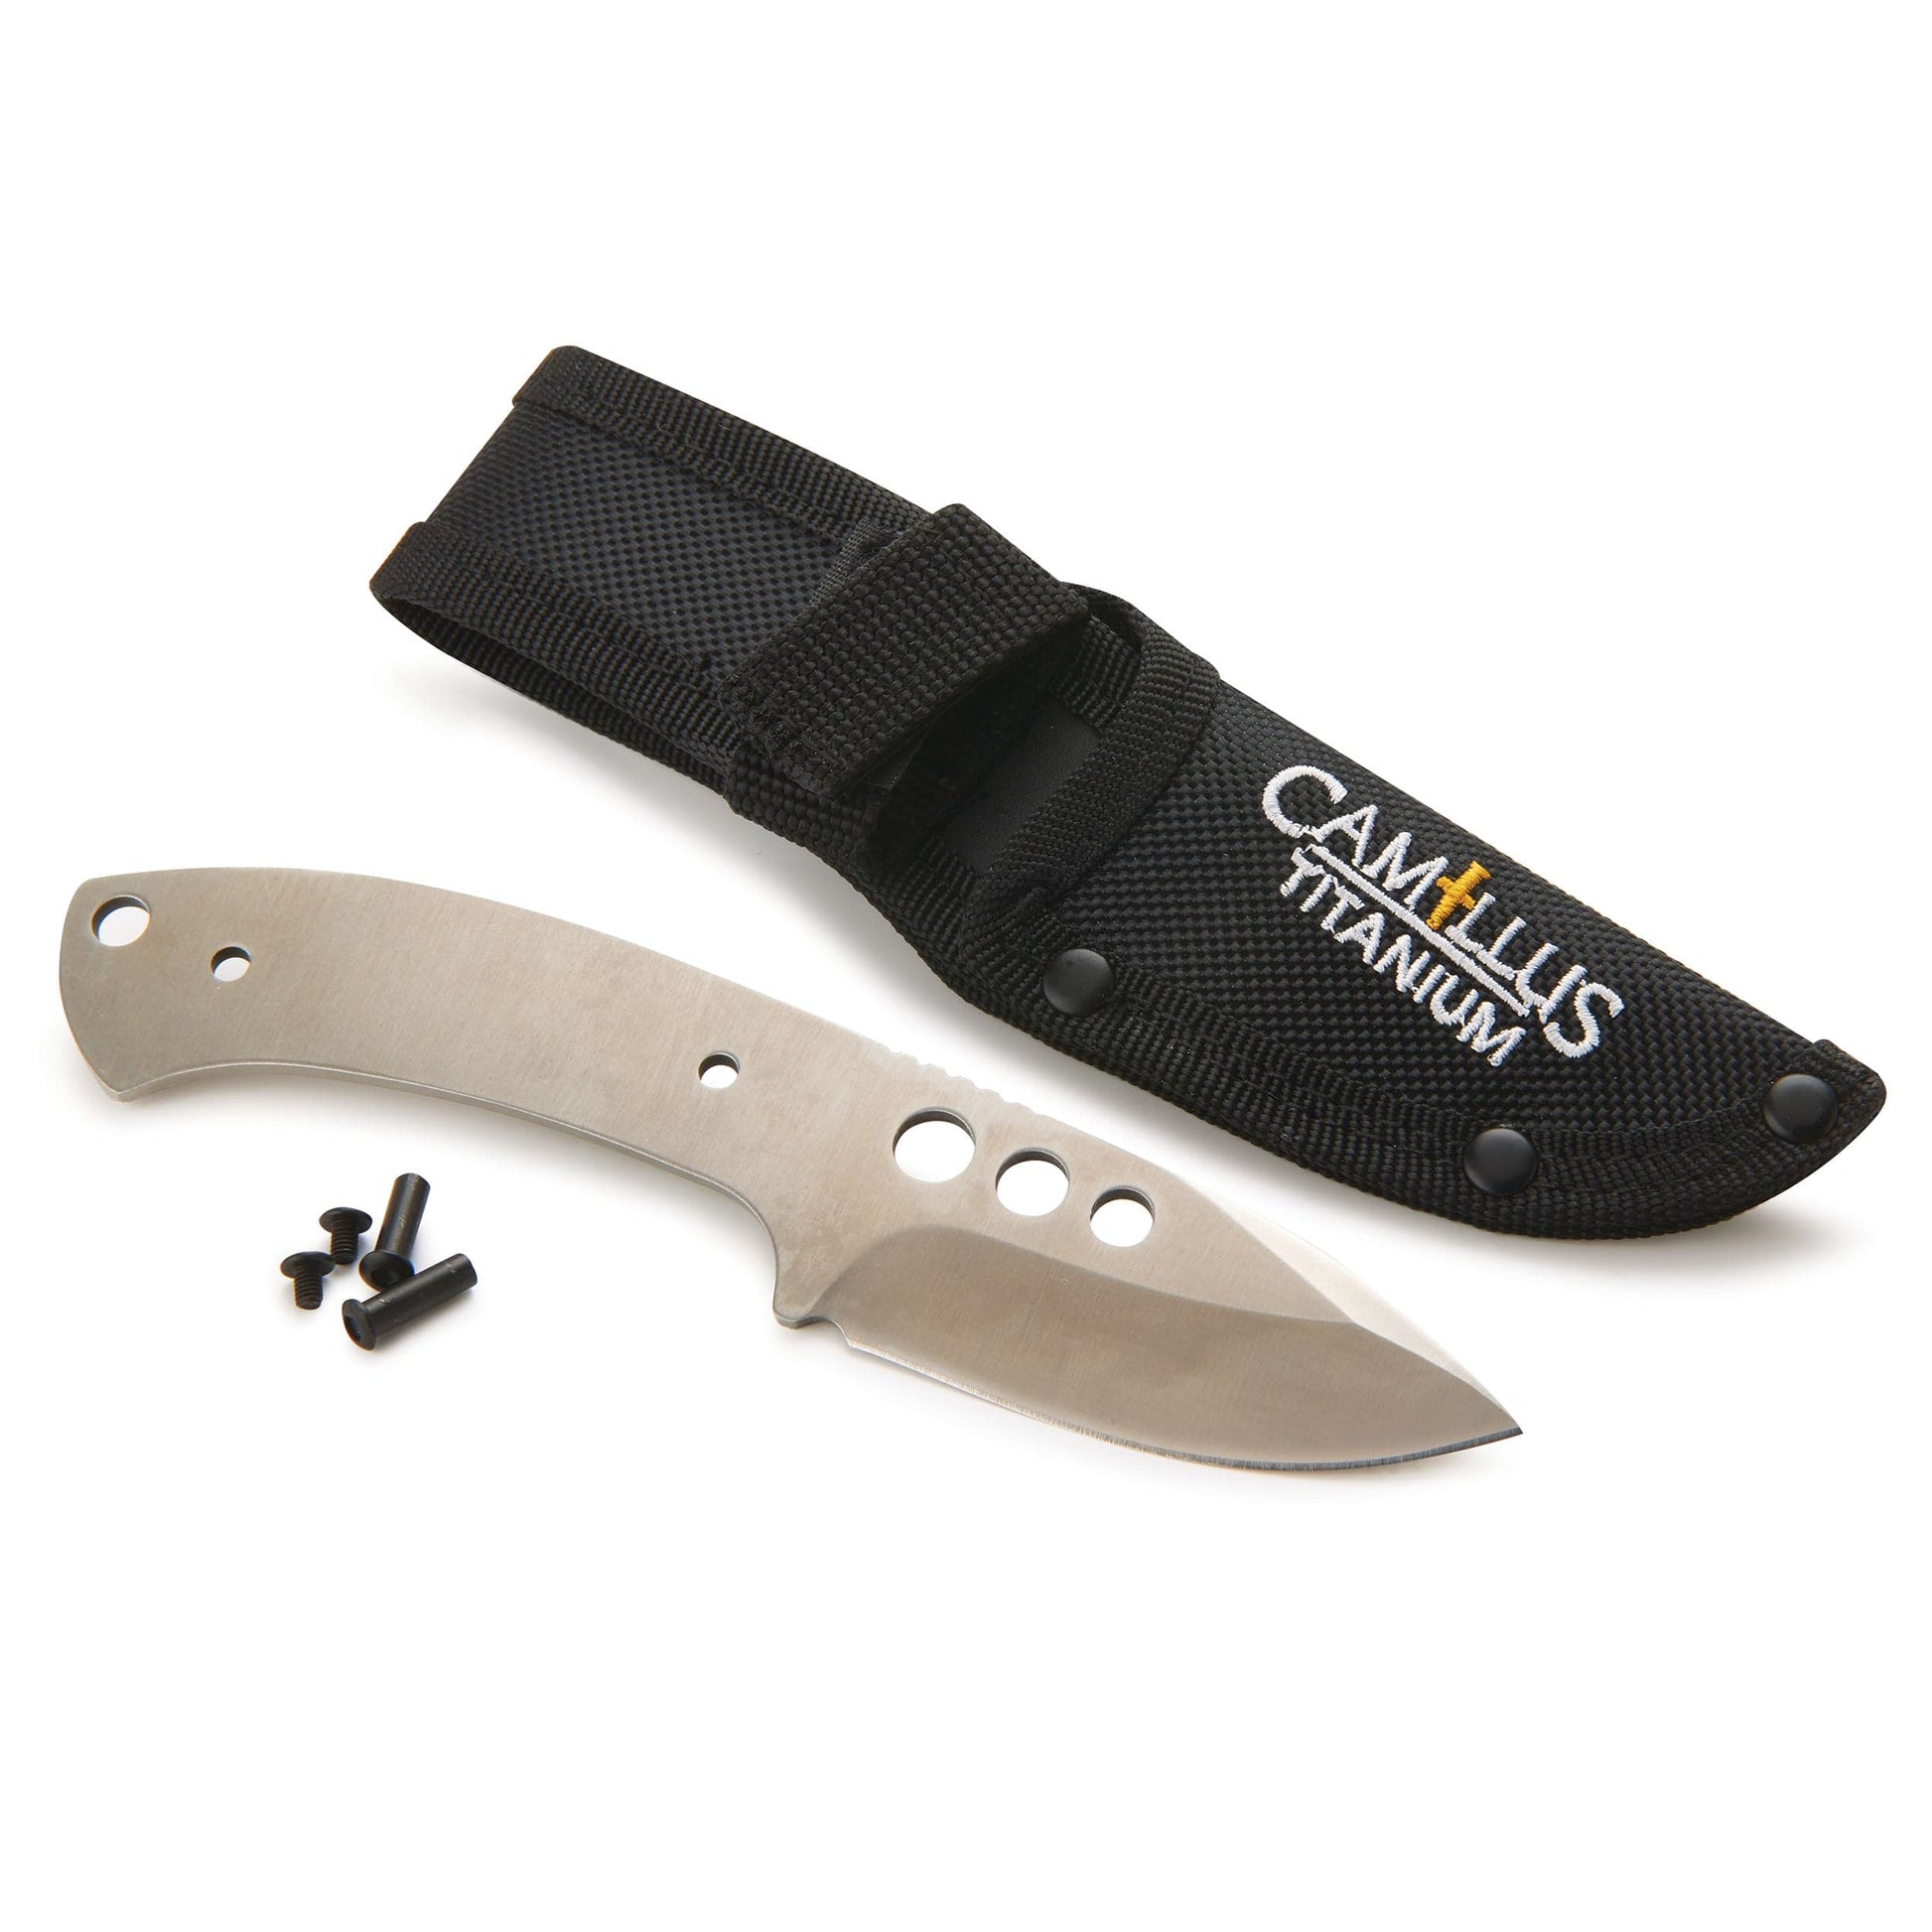 Camillus Straf Fixed Blade Knife for Hunting and Fishing - Unfinished Kit